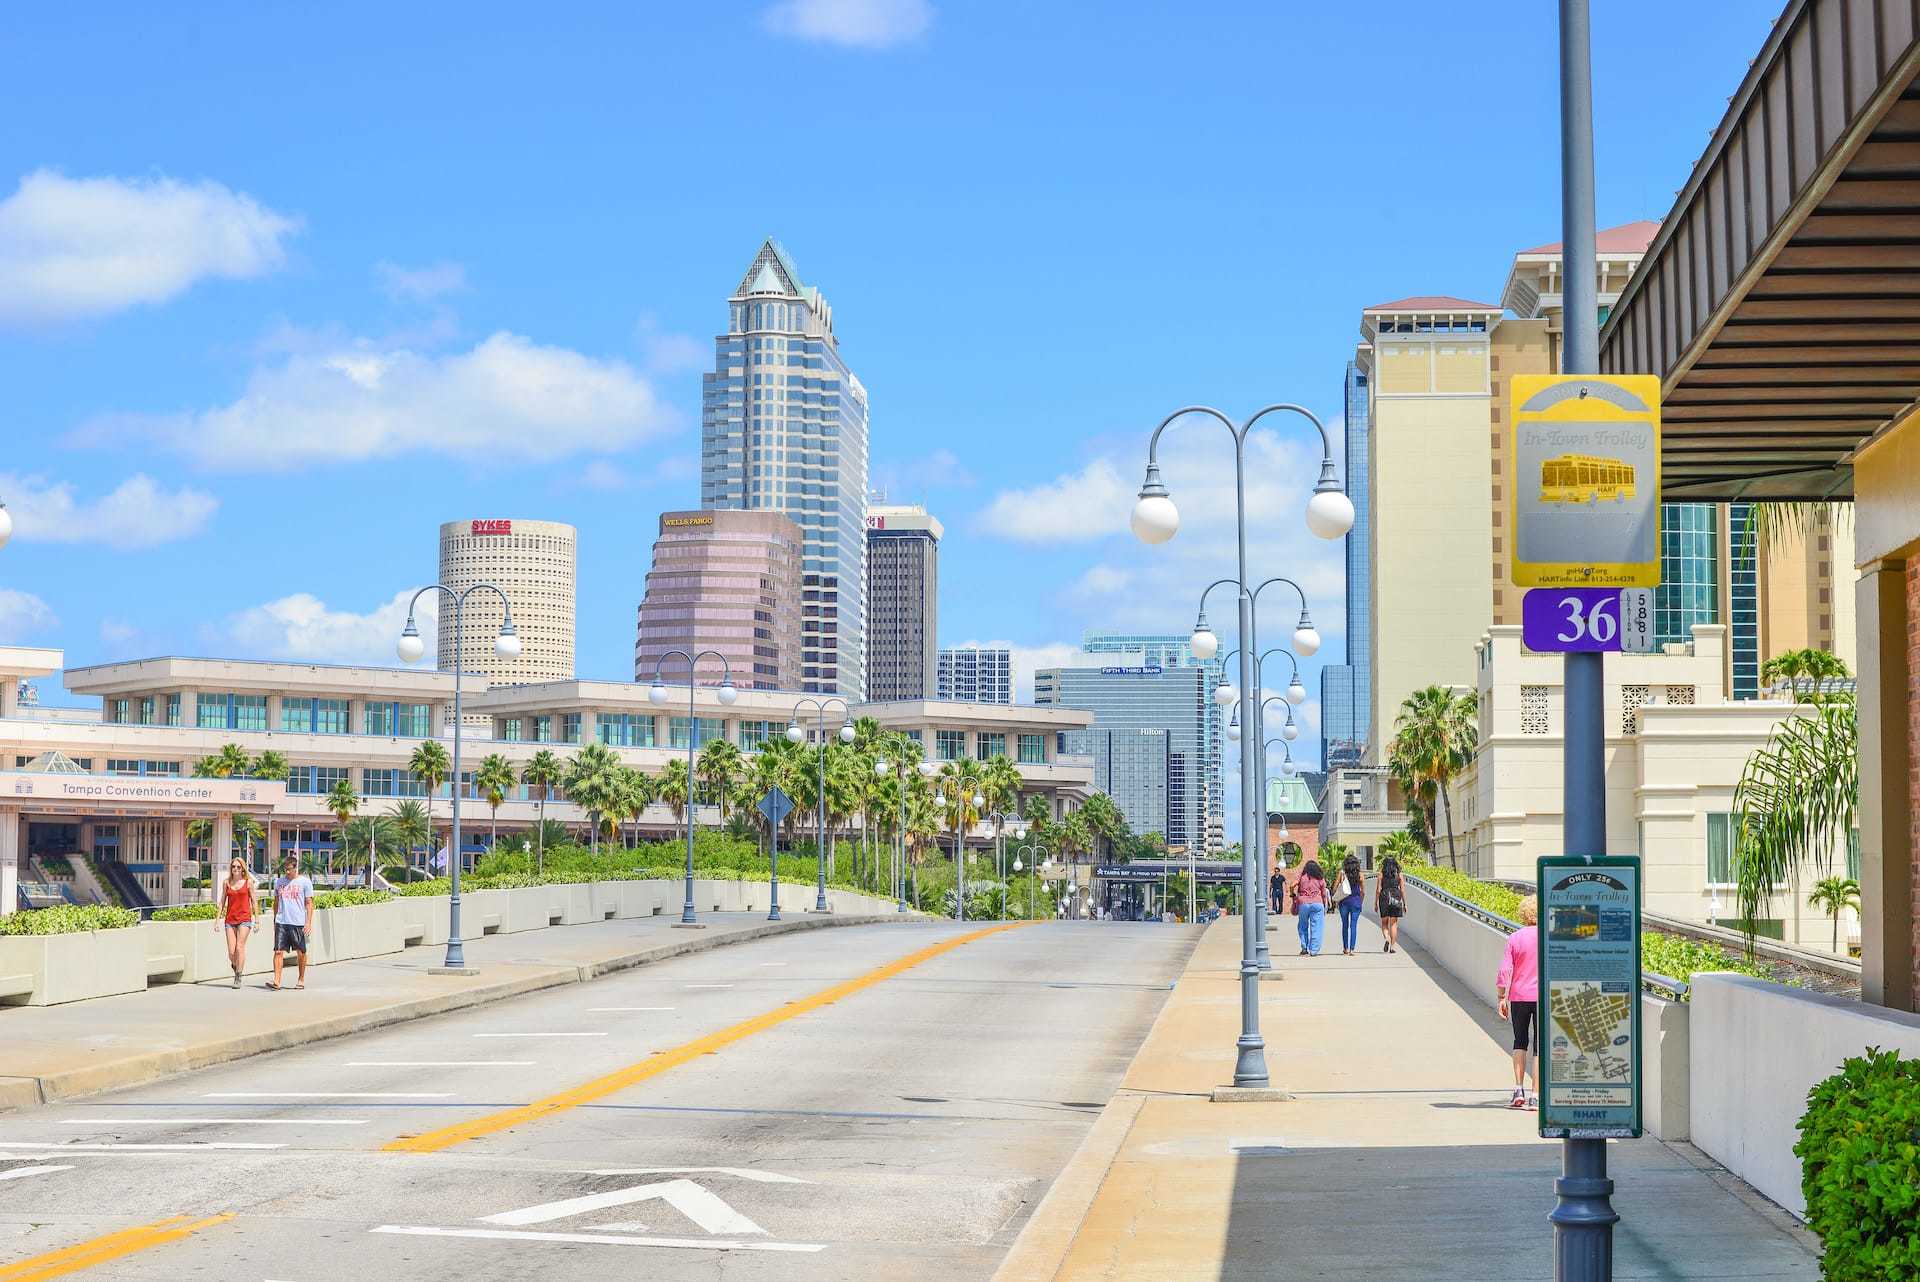 Street view of Harbour Island Bridge connecting to downtown Tampa, FL